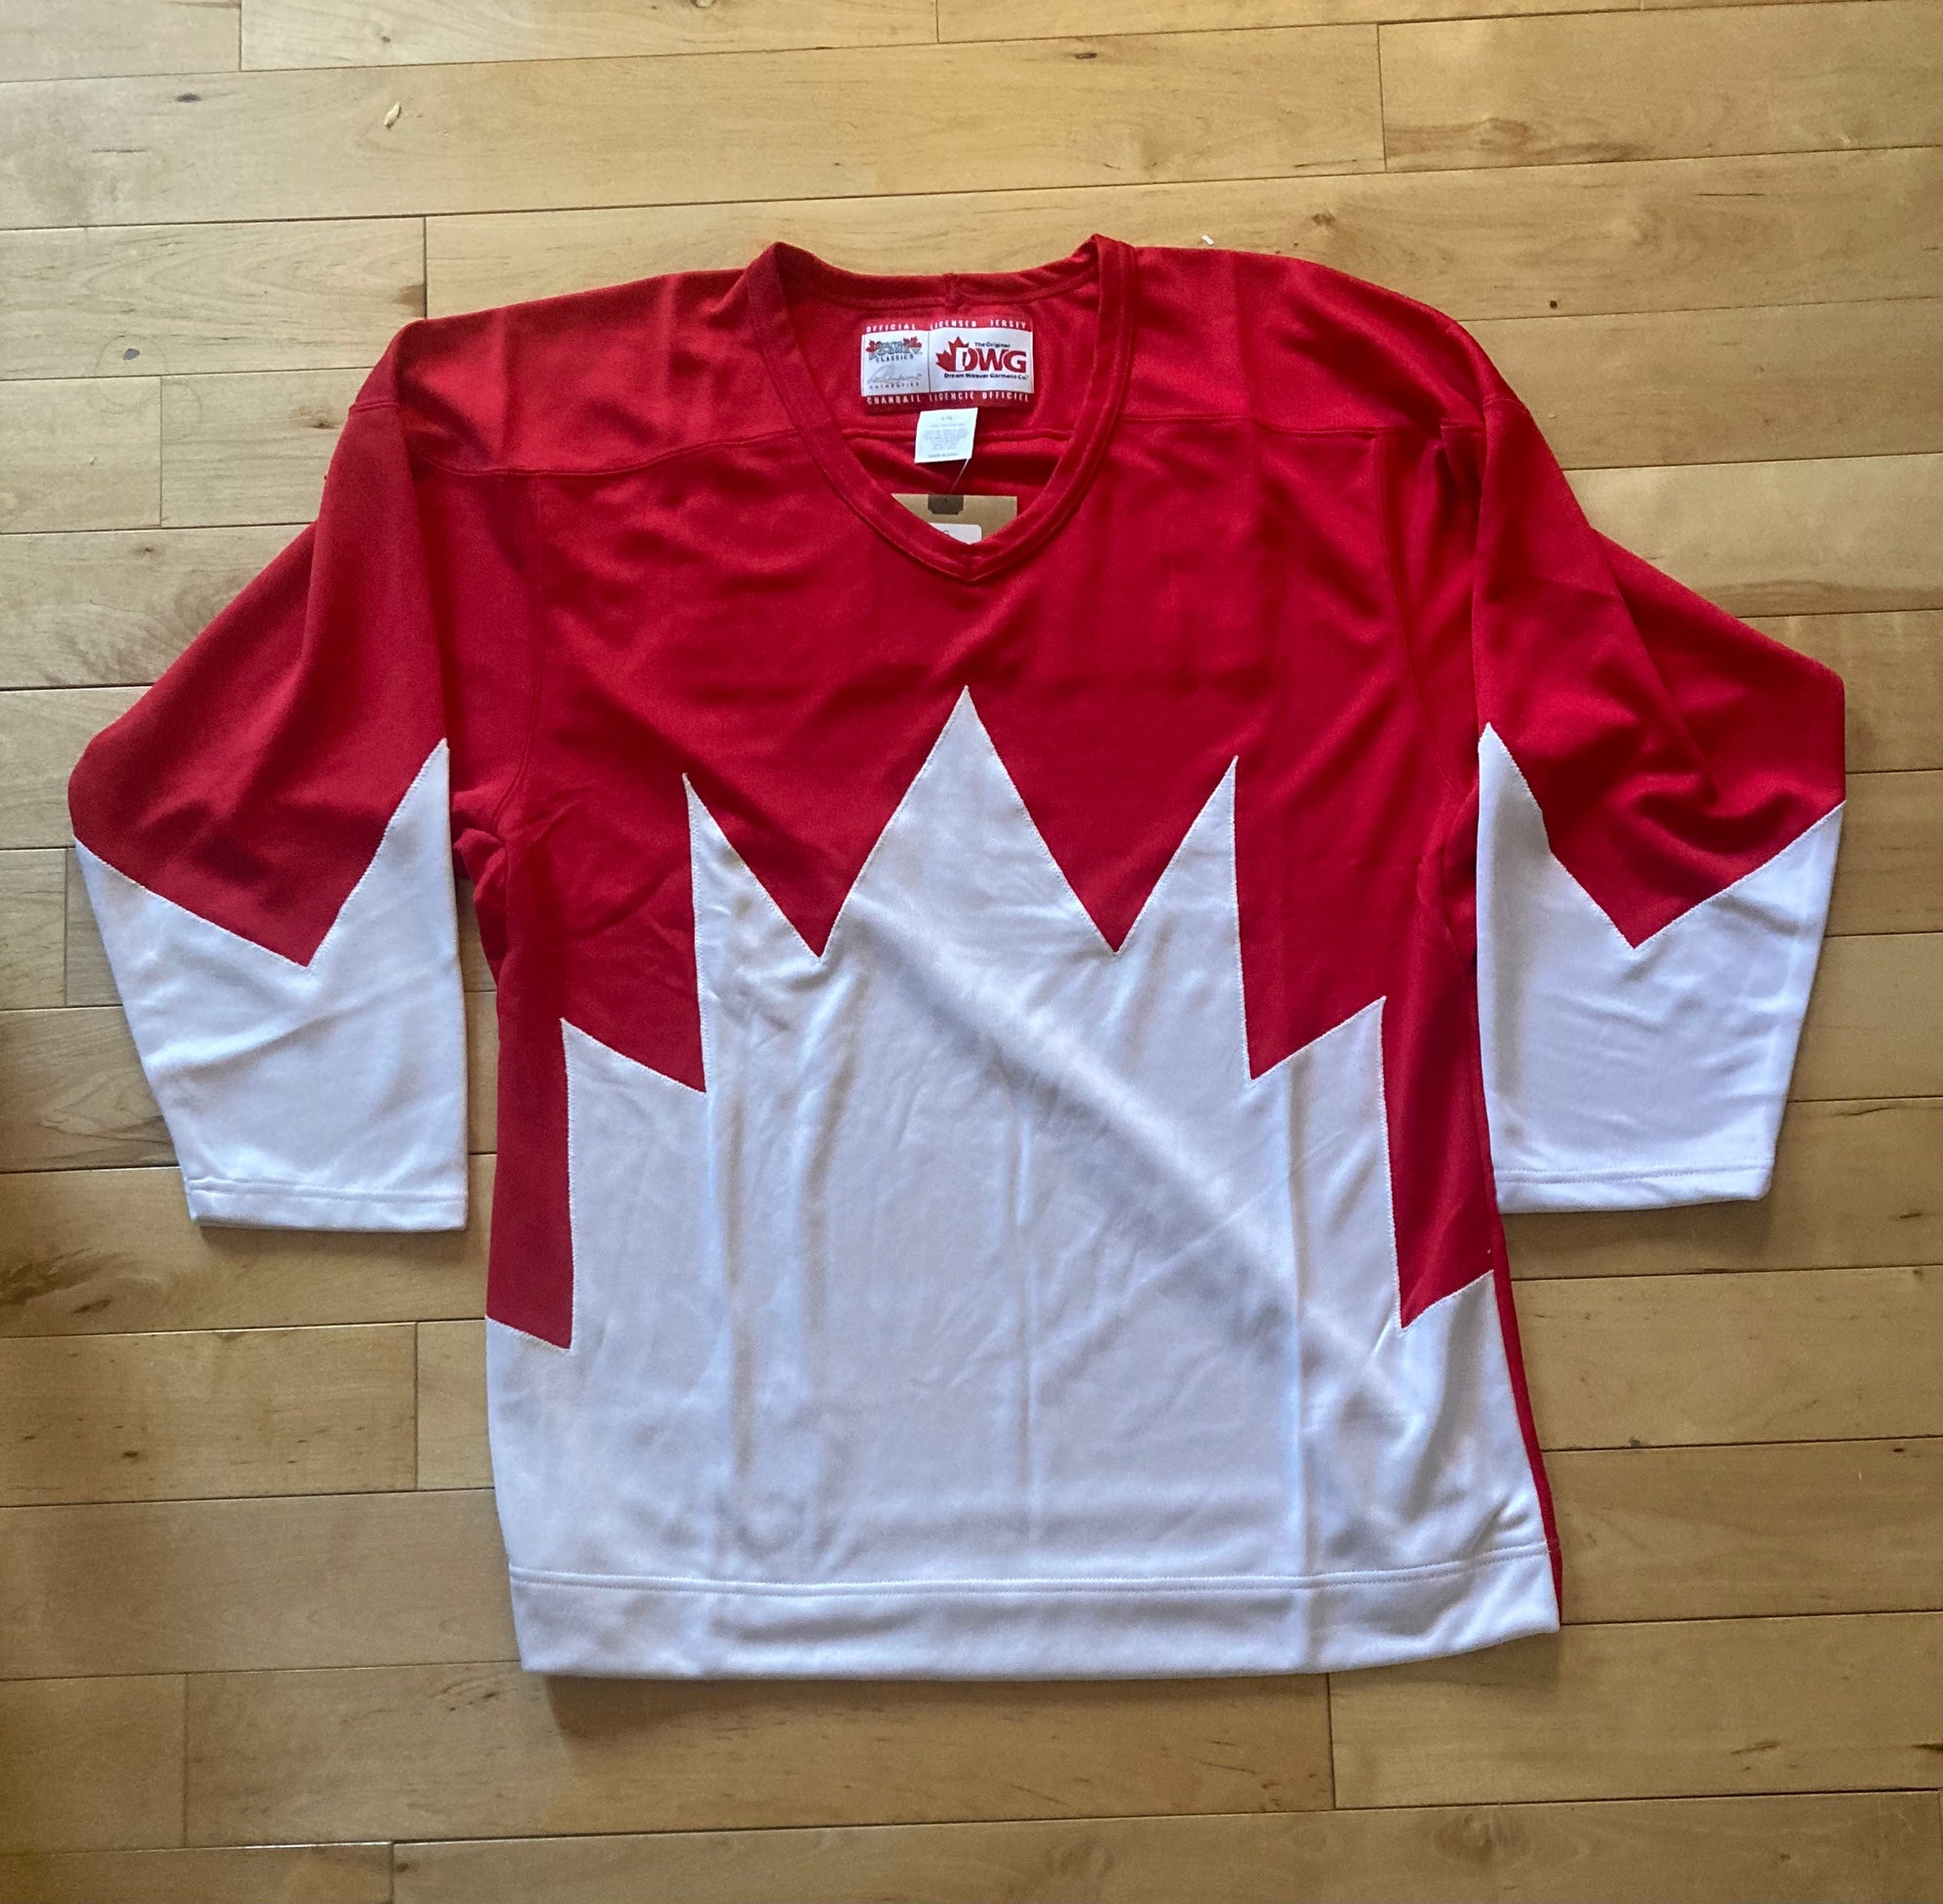 Team Canada's iconic '72 sweaters were designed in under 24 hours